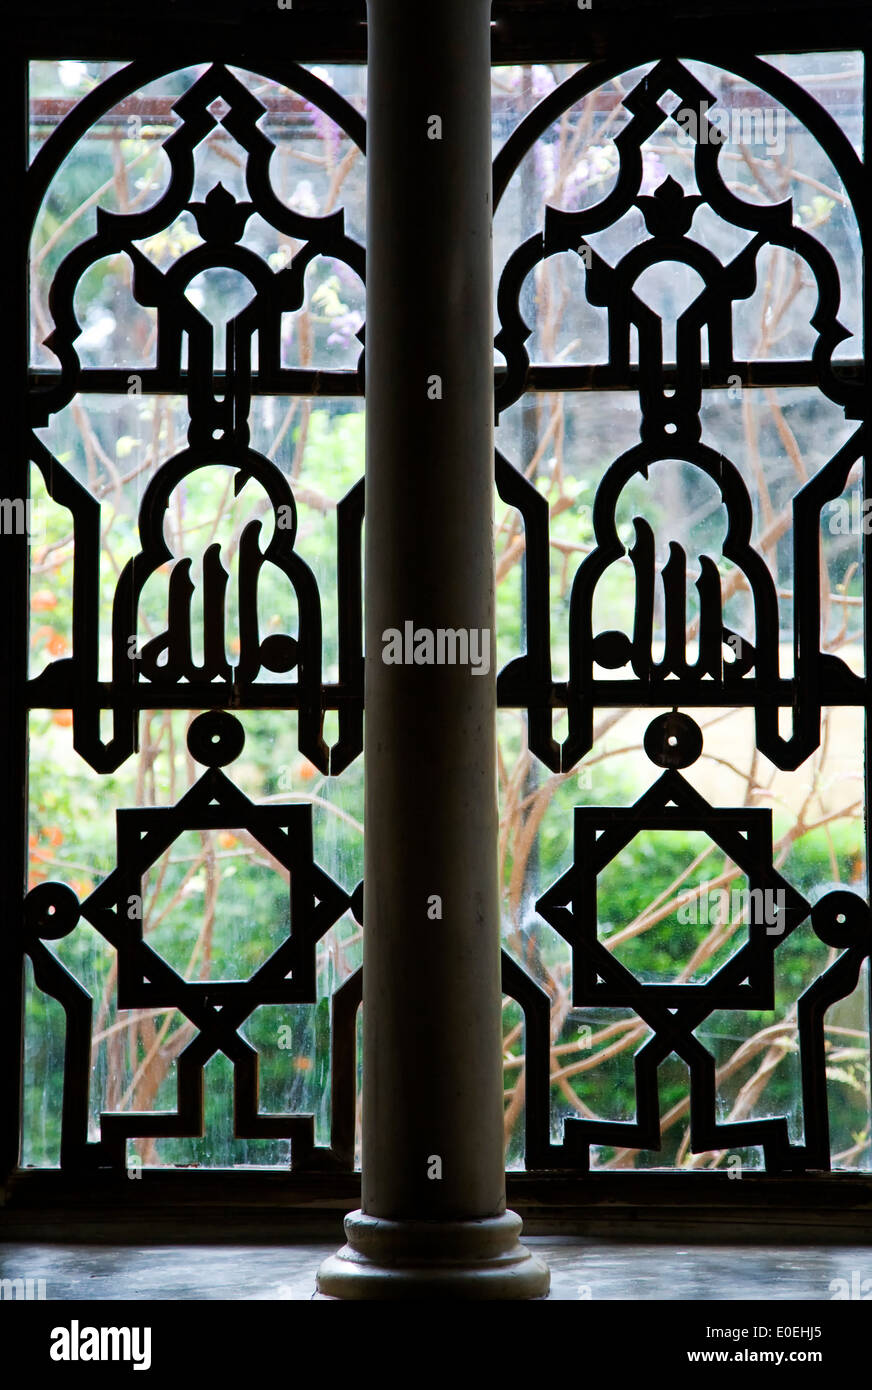 Intricate iron window grill, Reales Alcazares, Seville, Spain Stock Photo